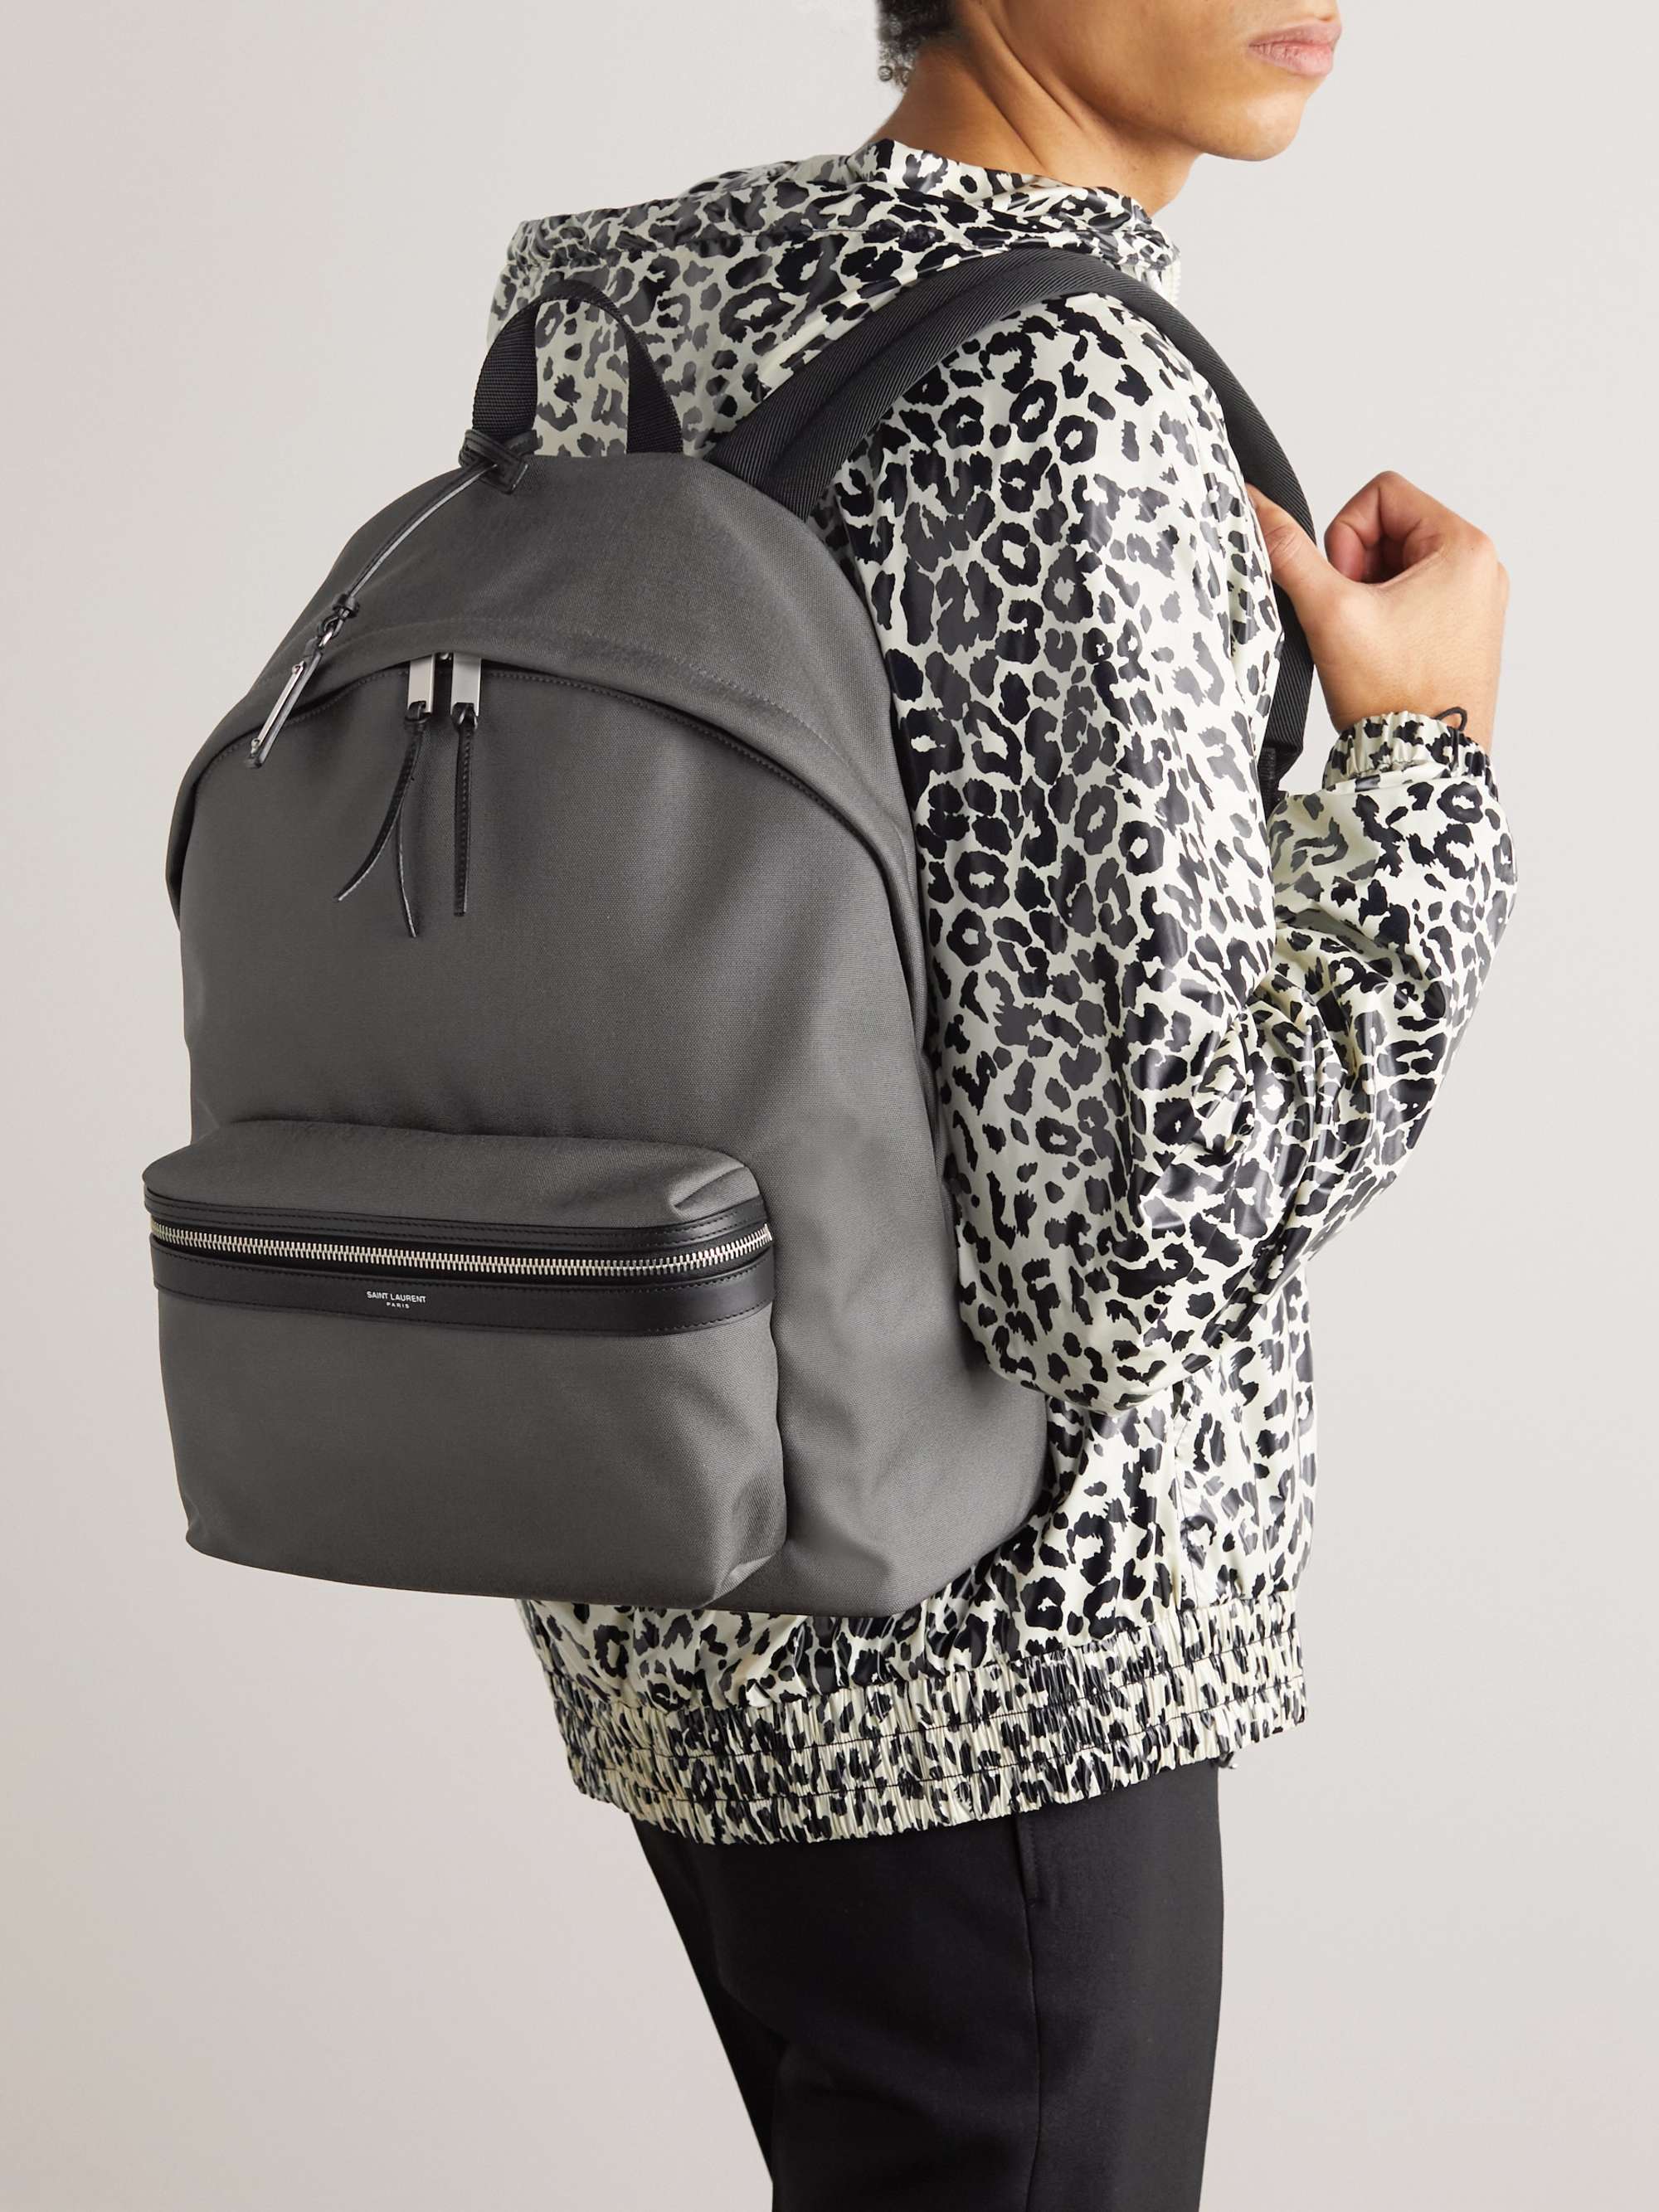 Saint Laurent City Backpack in Nylon Canvas and Leather